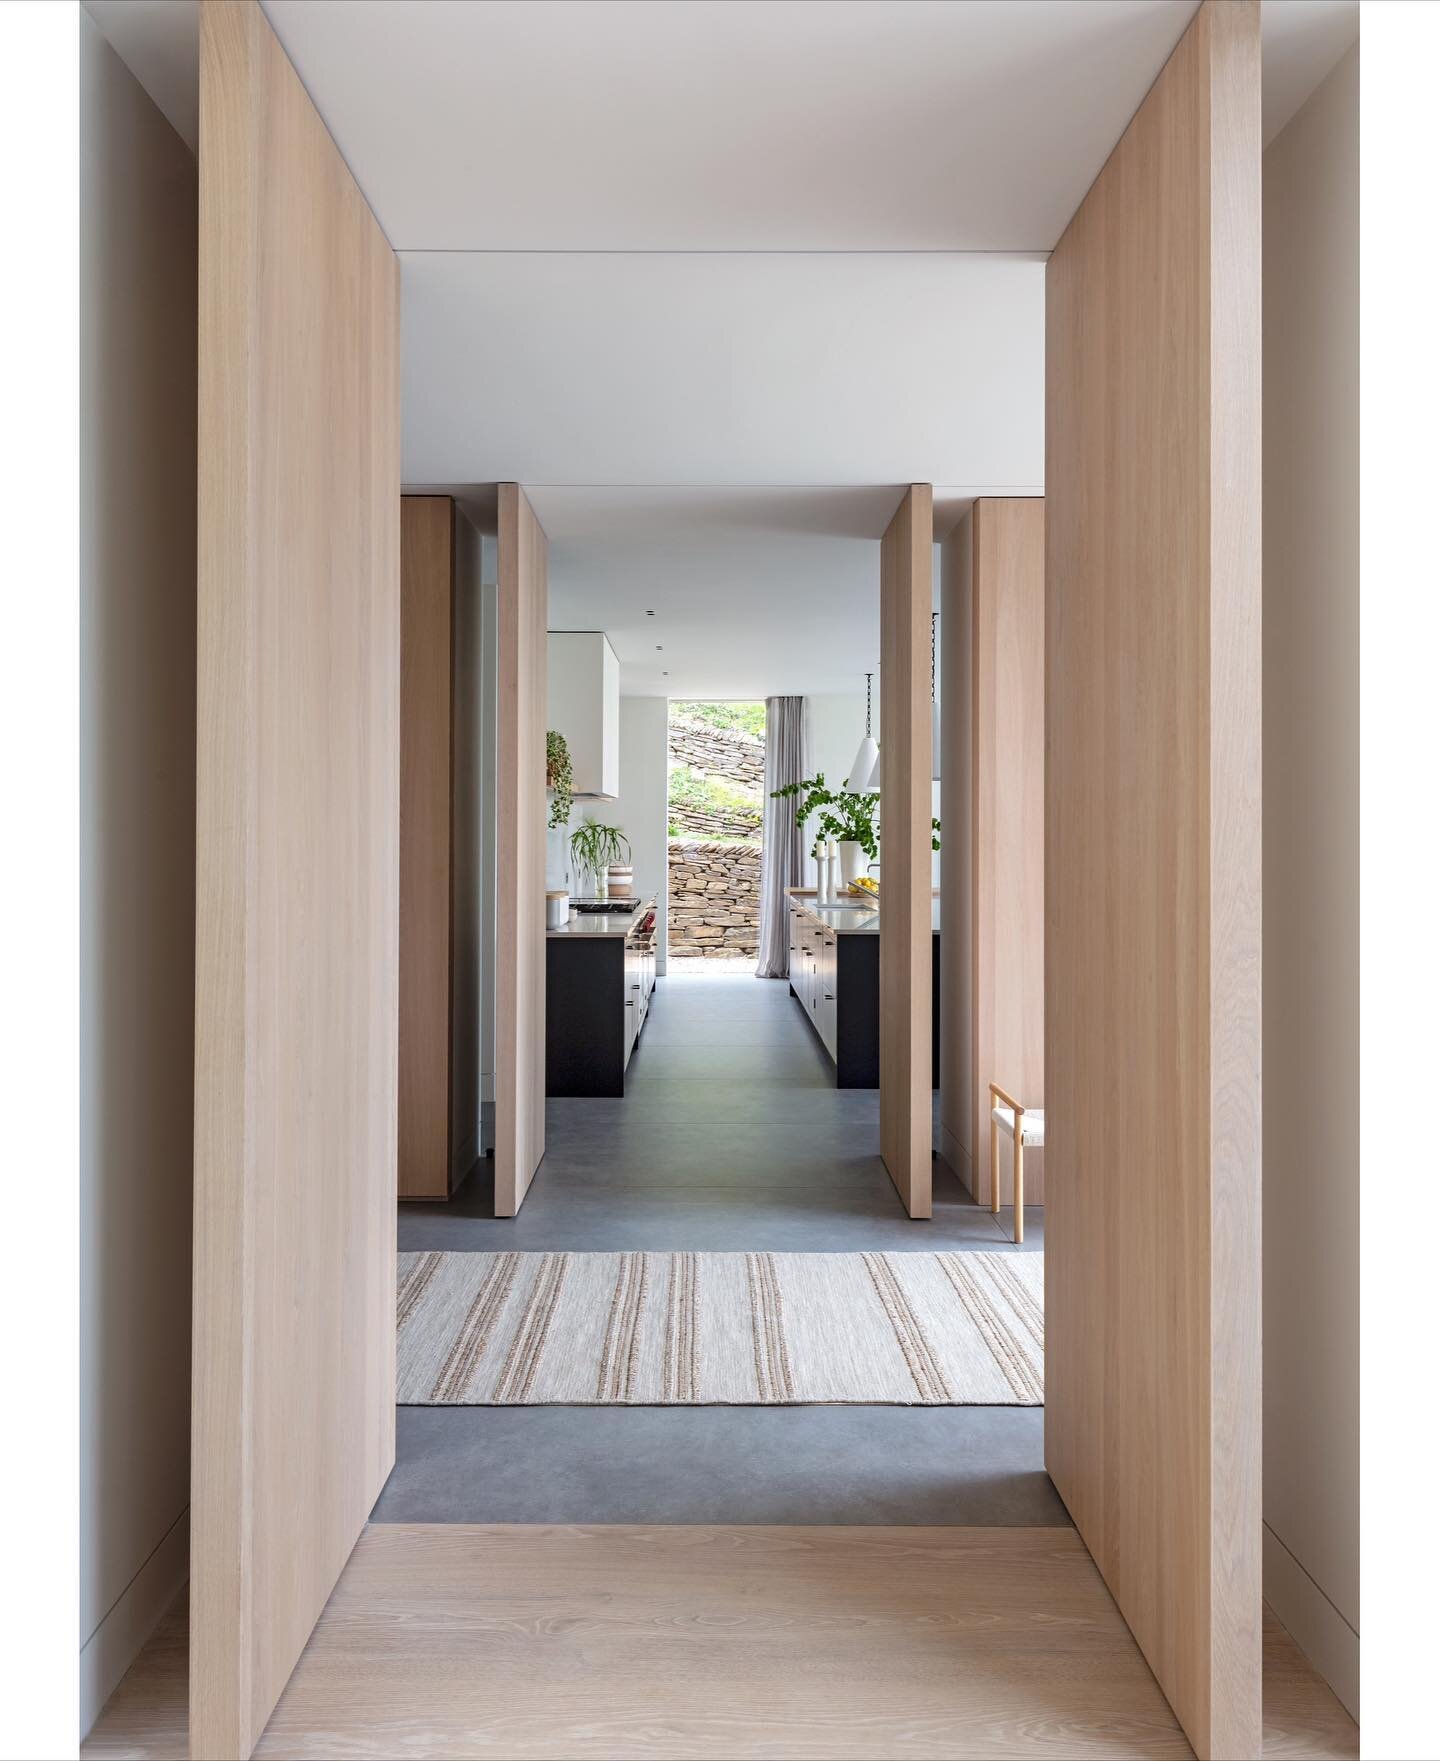 For this new beachside home in Cornwall we wanted to give the family the flexibility of having open plan spaces which could become more private when required. The  bespoke timber pivot doors do this beautifully. When closed they form the timber walls